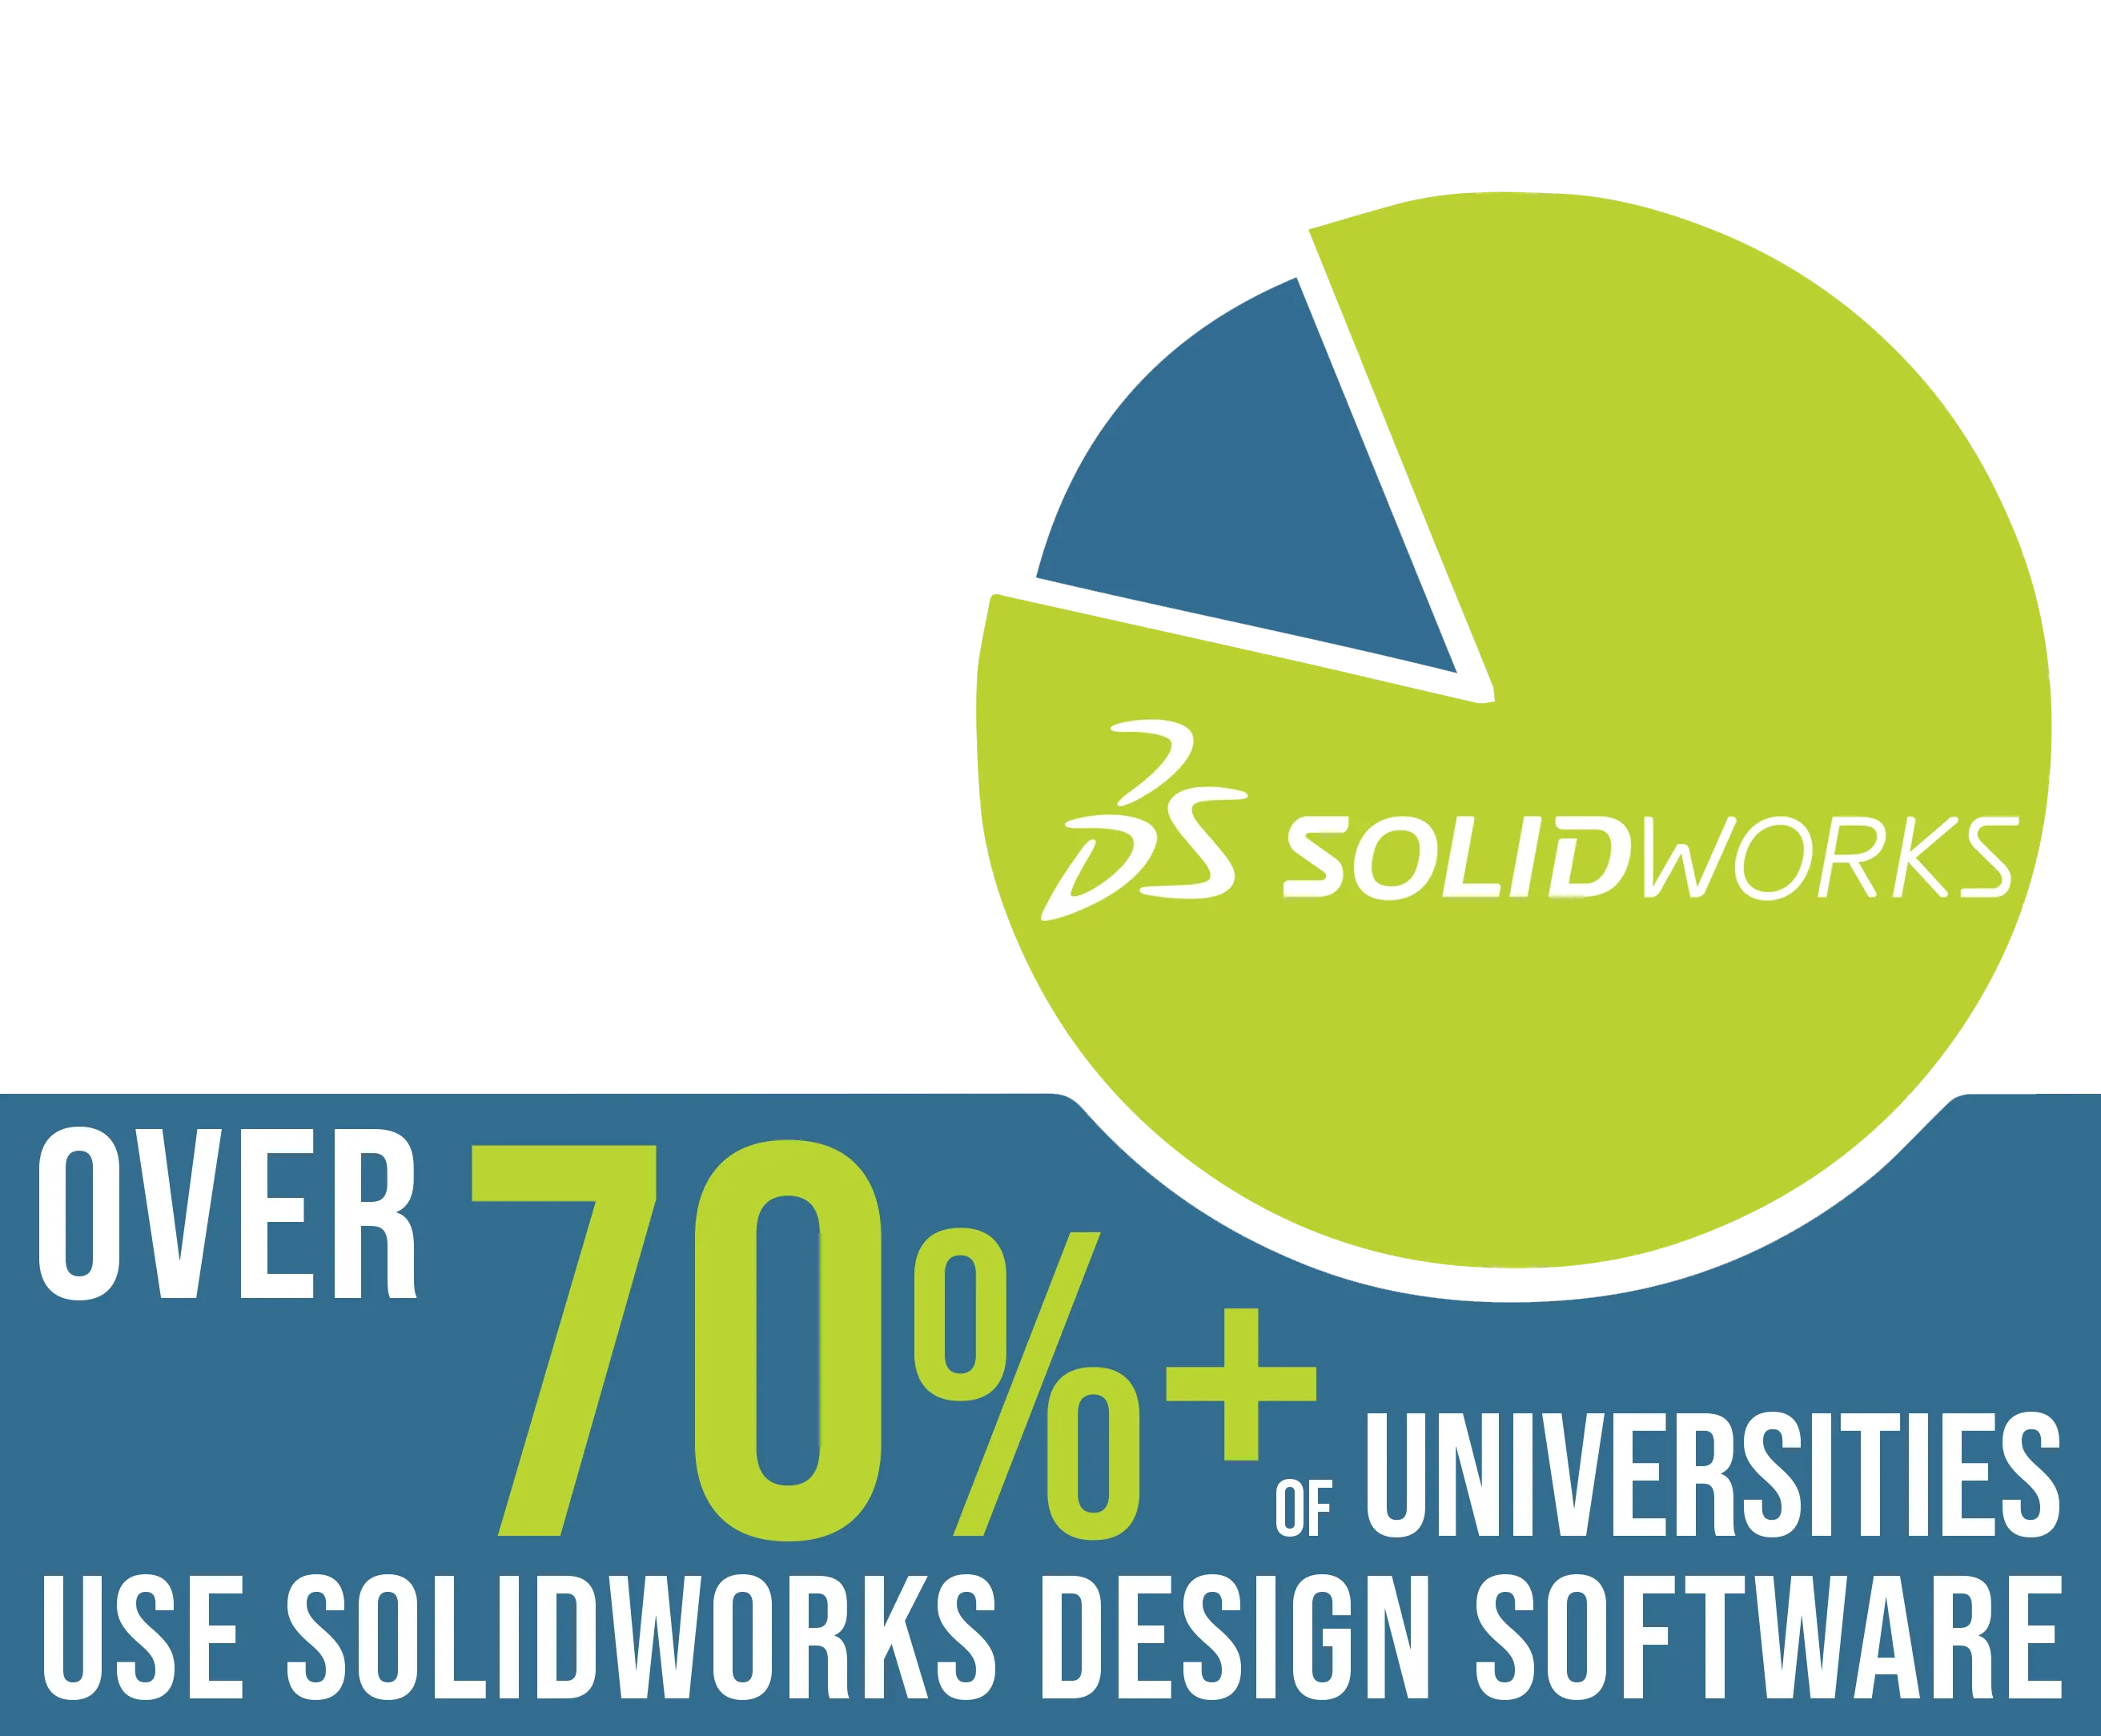 SOLIDWORKS 3D CAD is used by over 70% of Universities and Tech Schools